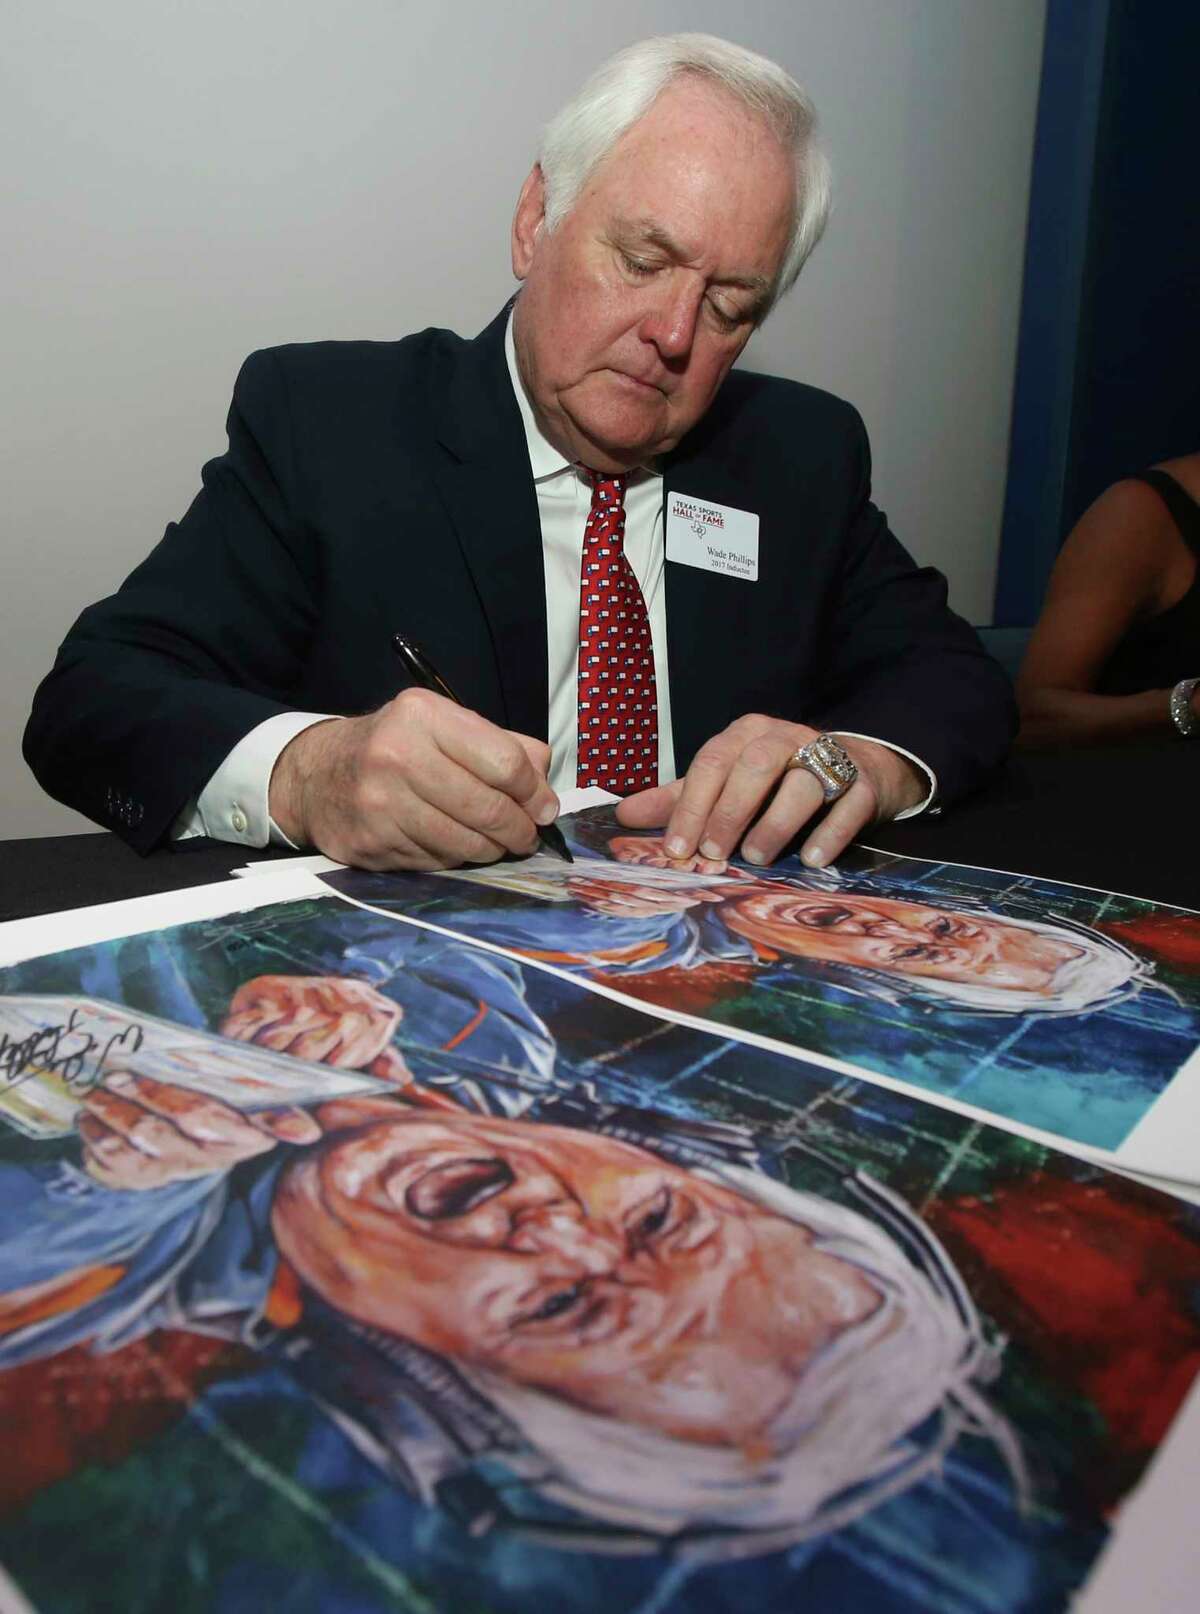 Wade Phillips autographs a poster of his coaching days in the NFL with the Denver Broncos Tuesday Feb. 21, 2017, in Waco, Texas before being inducted into the Texas Sports Hall of Fame class of 2017. (Jerry Larson/Waco Tribune Herald via AP)